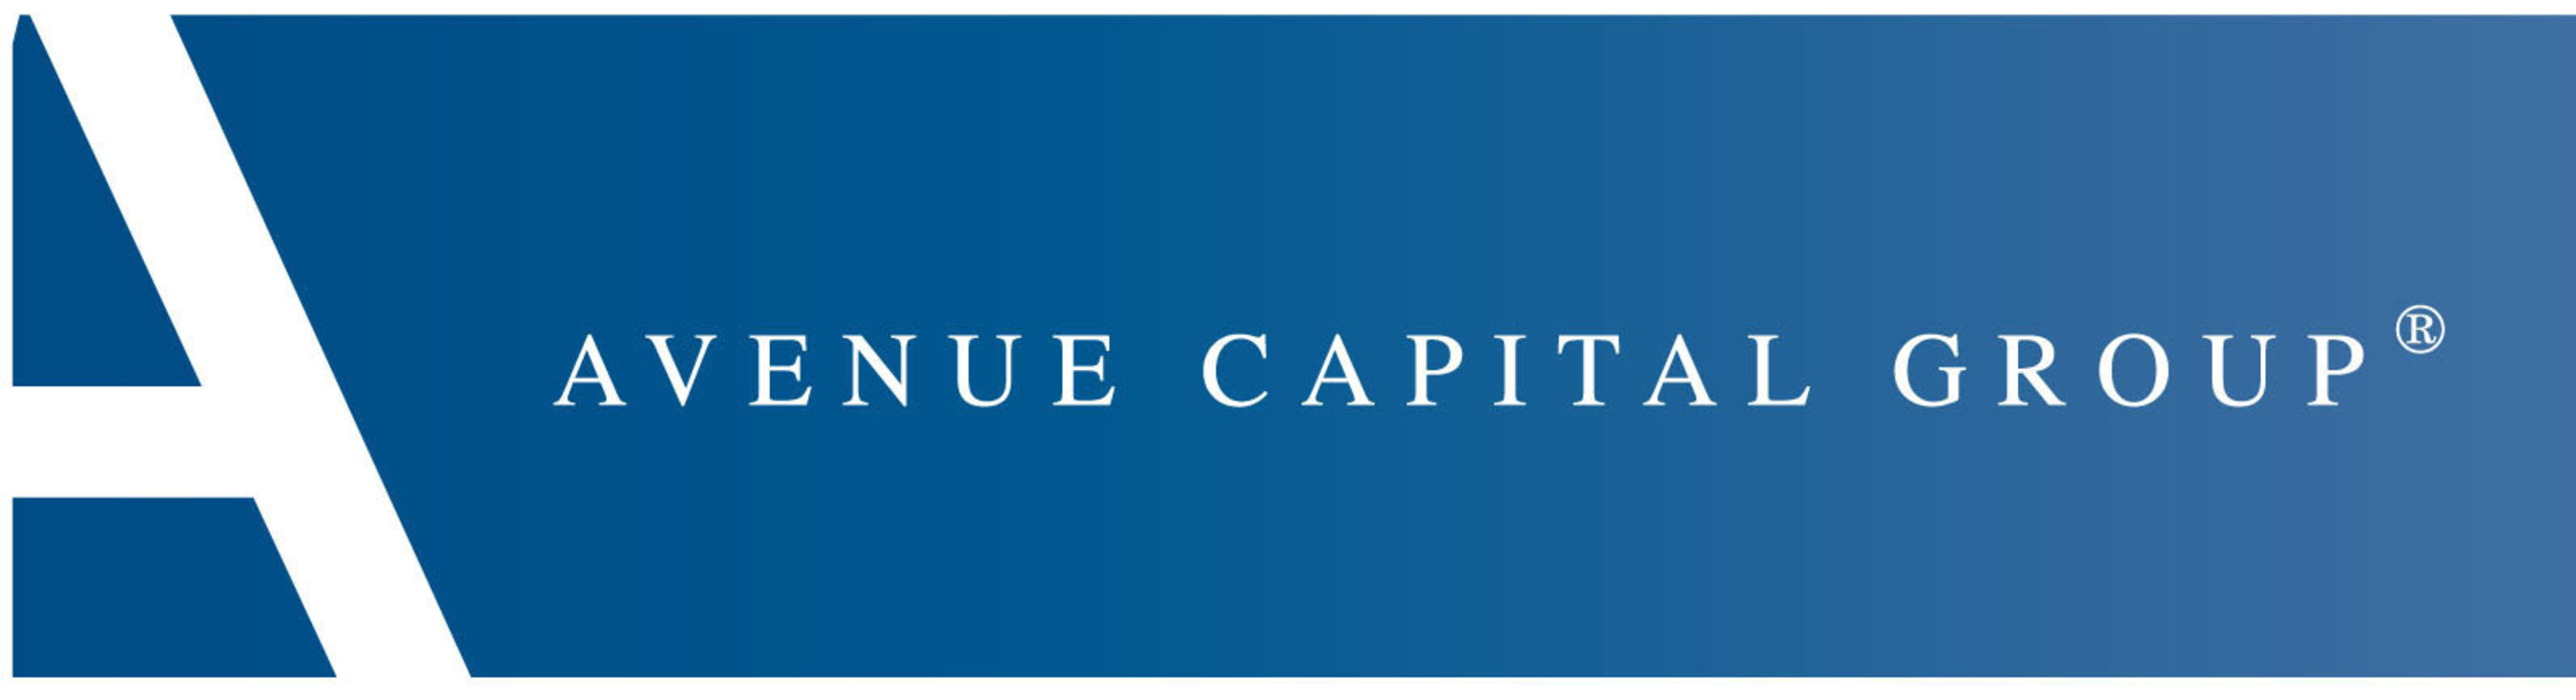 Avenue Capital Group has invested in the public and private debt and equity securities of distressed companies across a variety of industries since 1995. Headquartered in New York with multiple offices in Europe and Asia, Avenue pursues its value-oriented strategy with skilled investment professionals. Find out more at: www.avenuecapital.com.